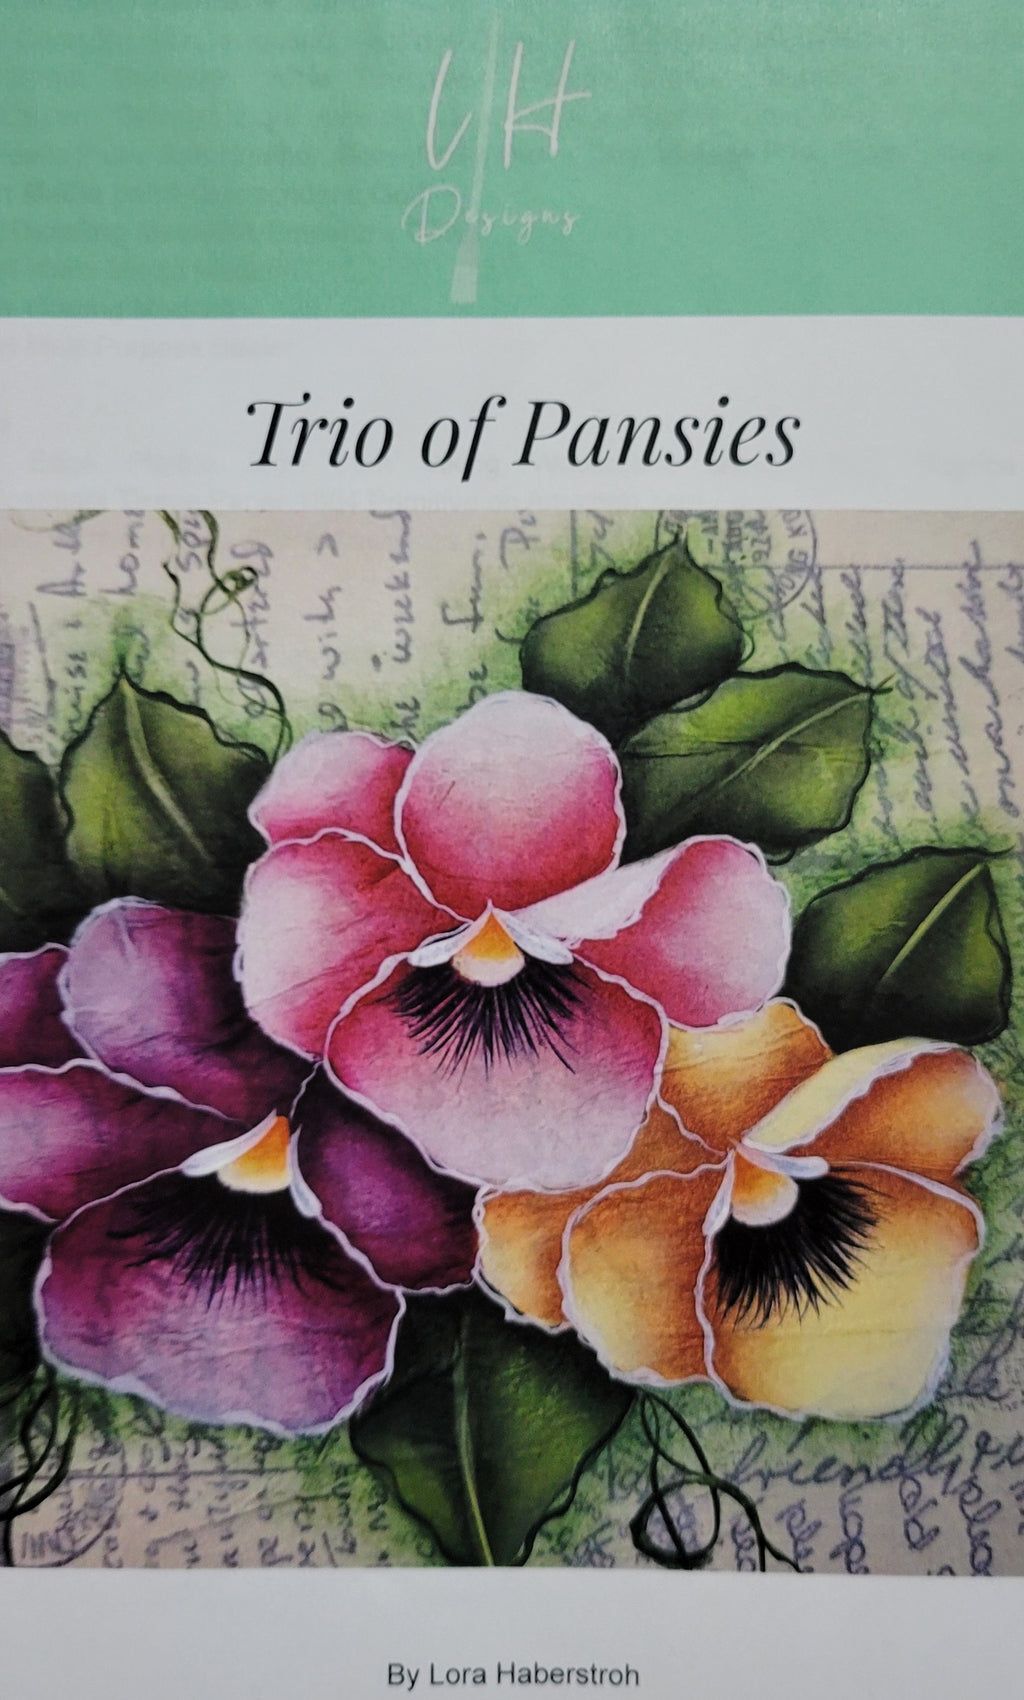 Trio of Pansies packet by Lora Haberstroh